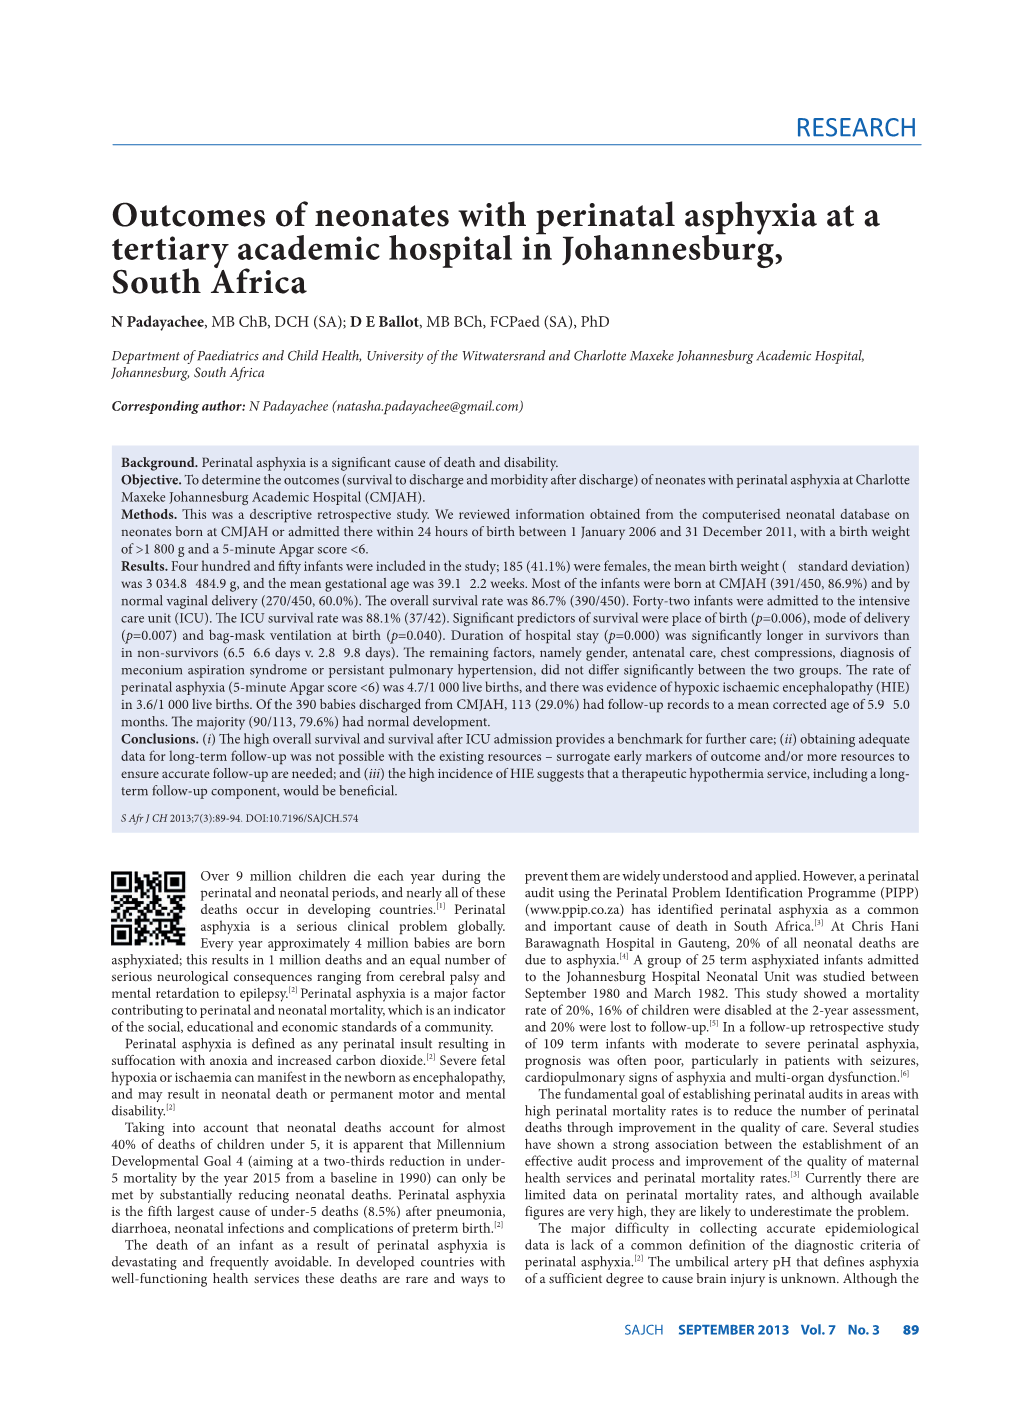 Outcomes of Neonates with Perinatal Asphyxia at a Tertiary Academic